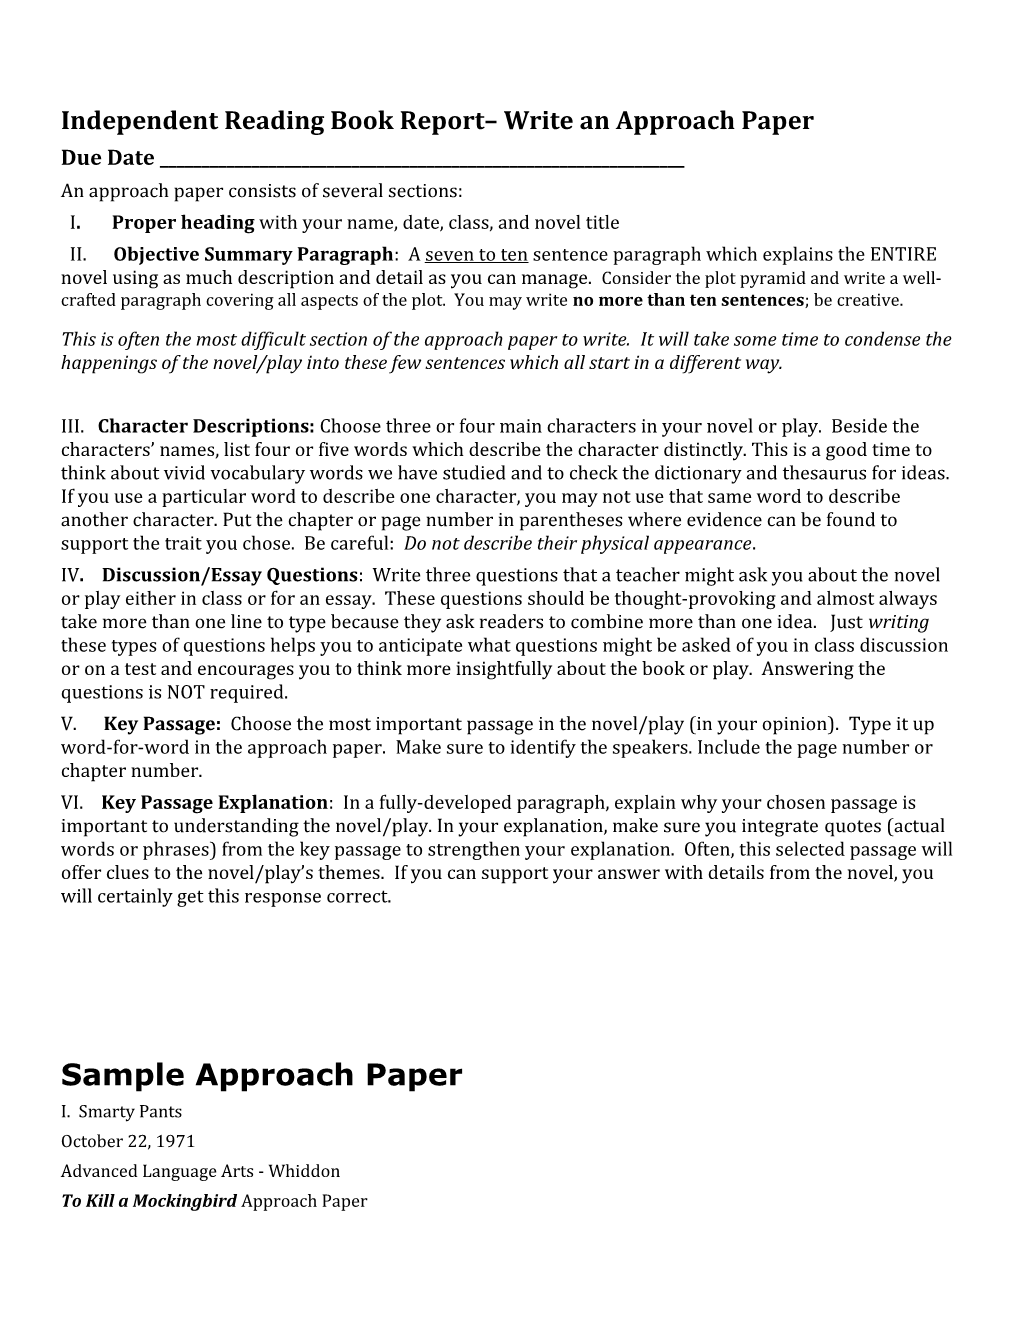 Independent Reading Book Report Write an Approach Paper